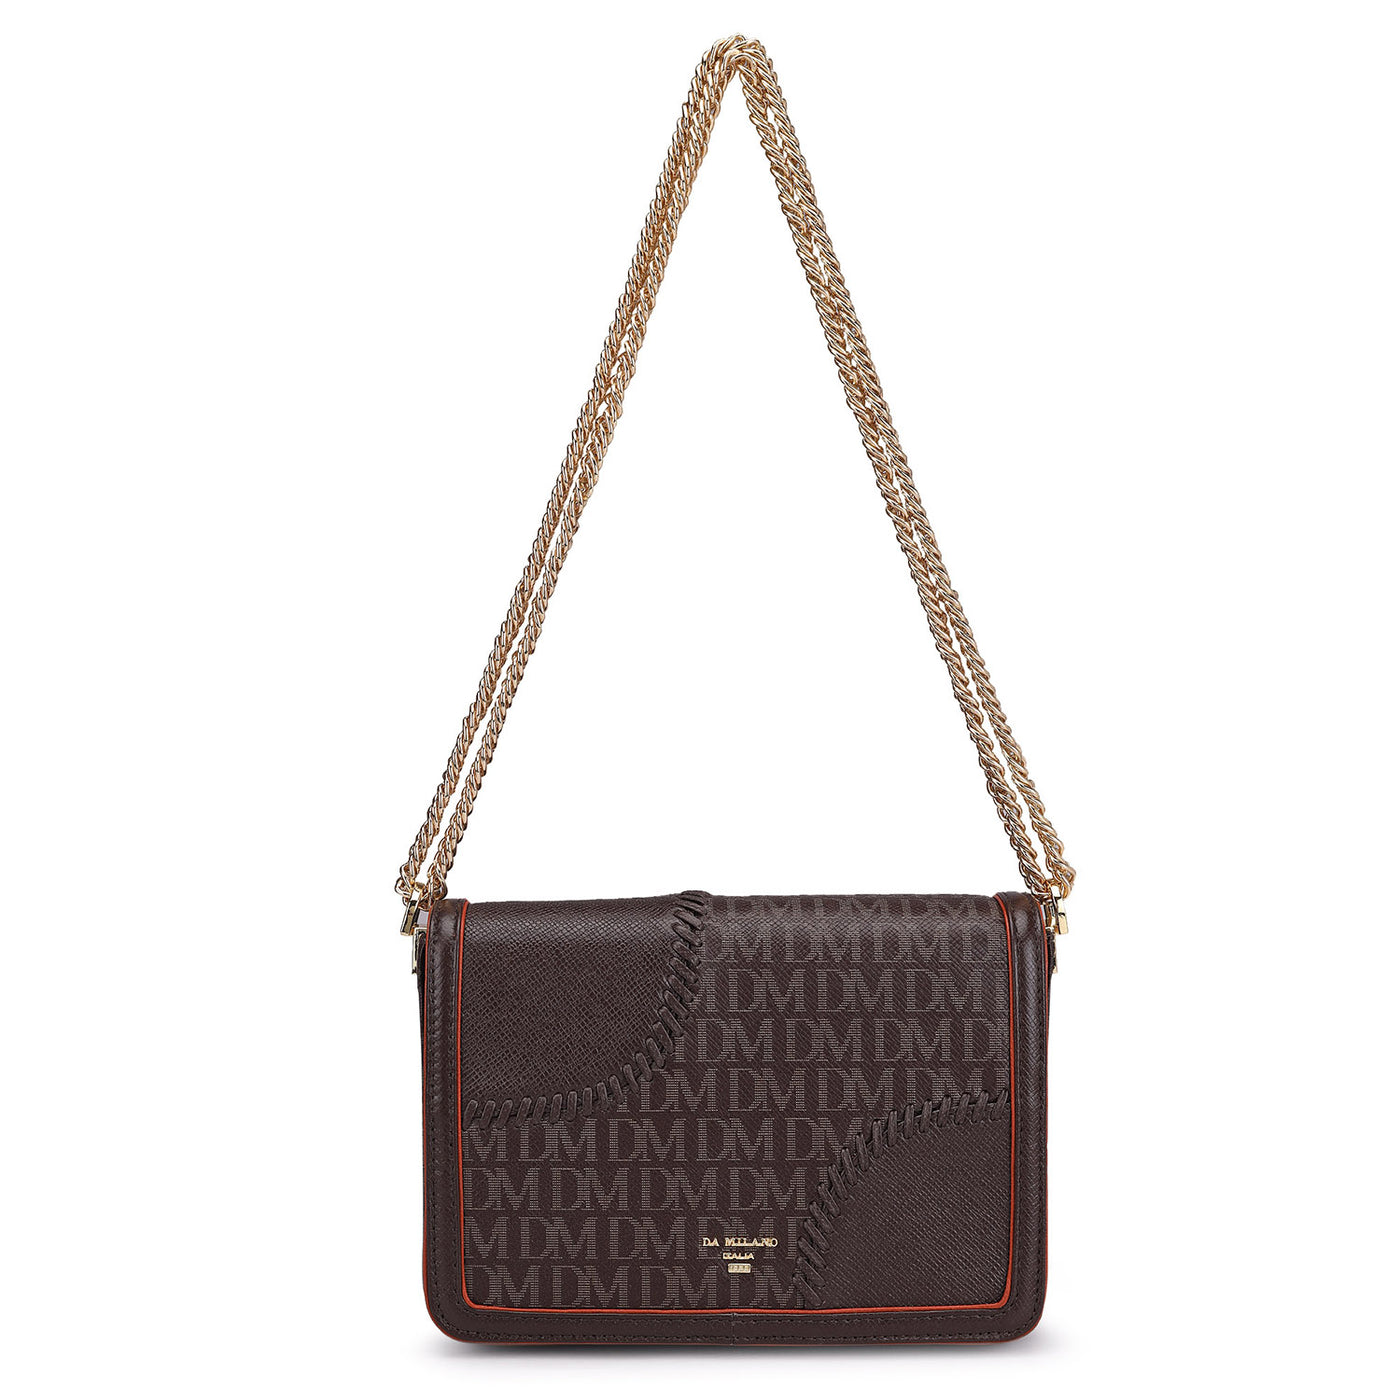 Small Monogram Franzy Leather Shoulder Bag - Chocolate